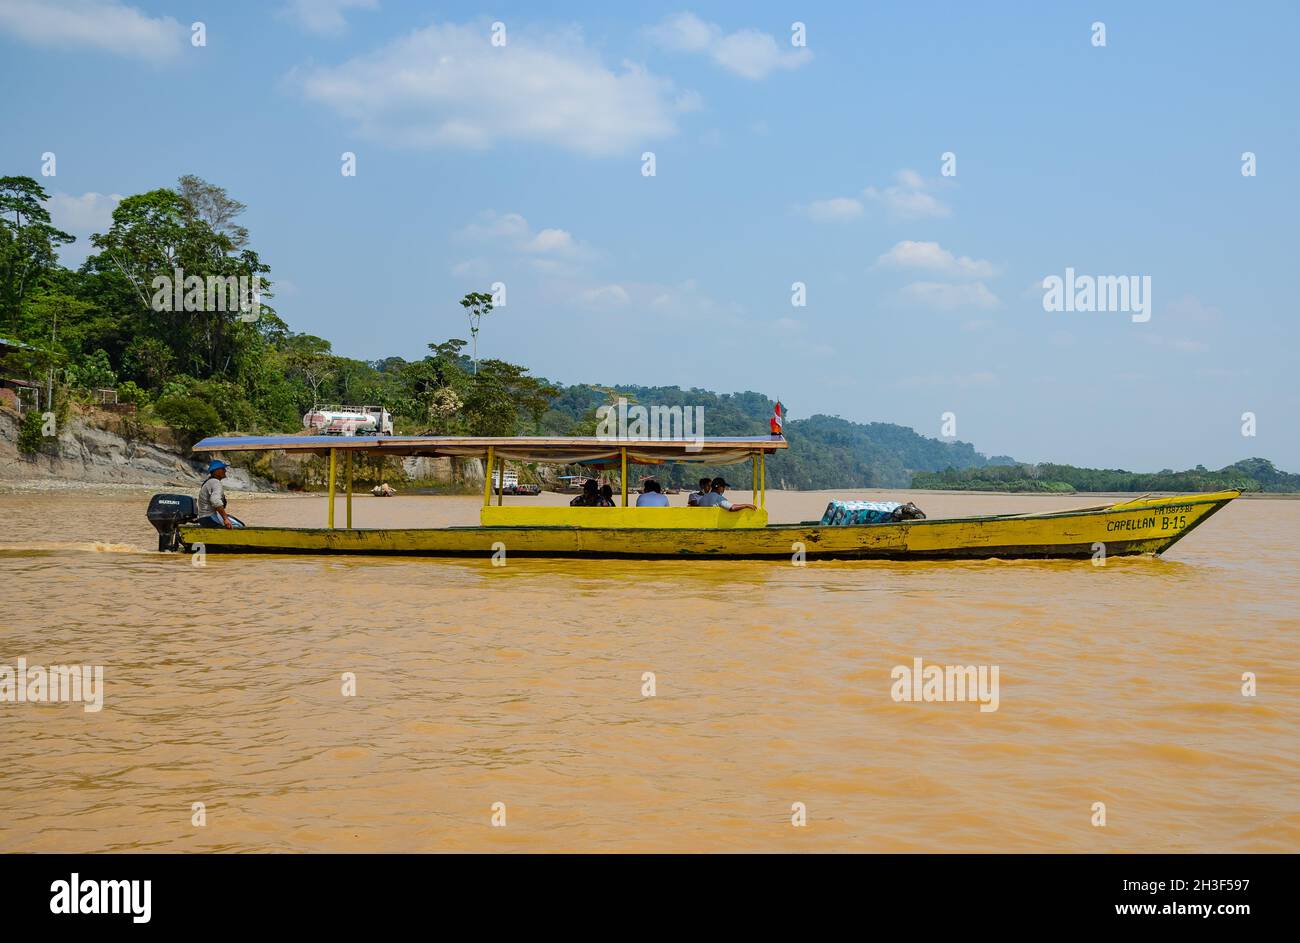 Page 3 - Dios High Resolution Stock Photography and Images - Alamy